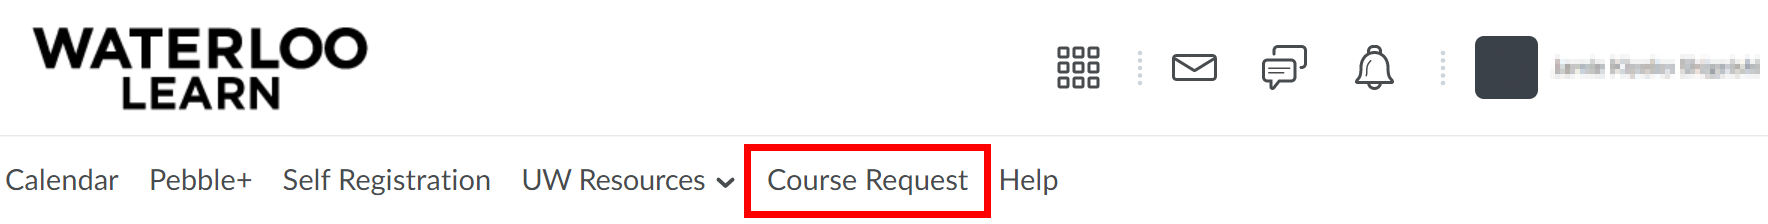 Course Request link highlighted.